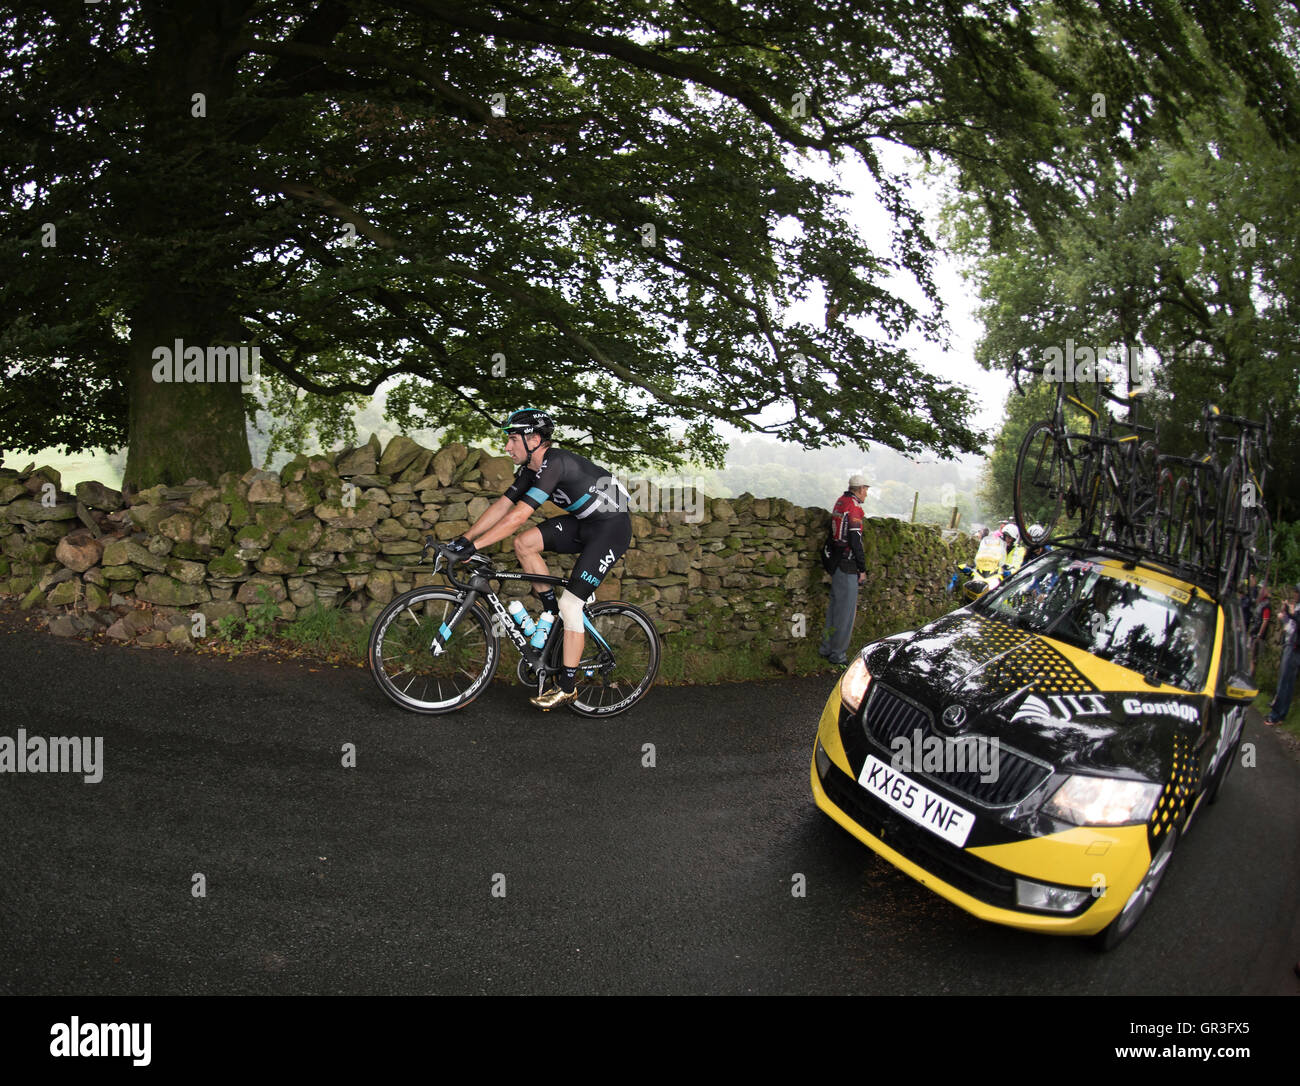 Elia Viviani, Team Sky, climbing the Struggle on the second stage of the 2016 Tour of Britain cycle race. Stock Photo